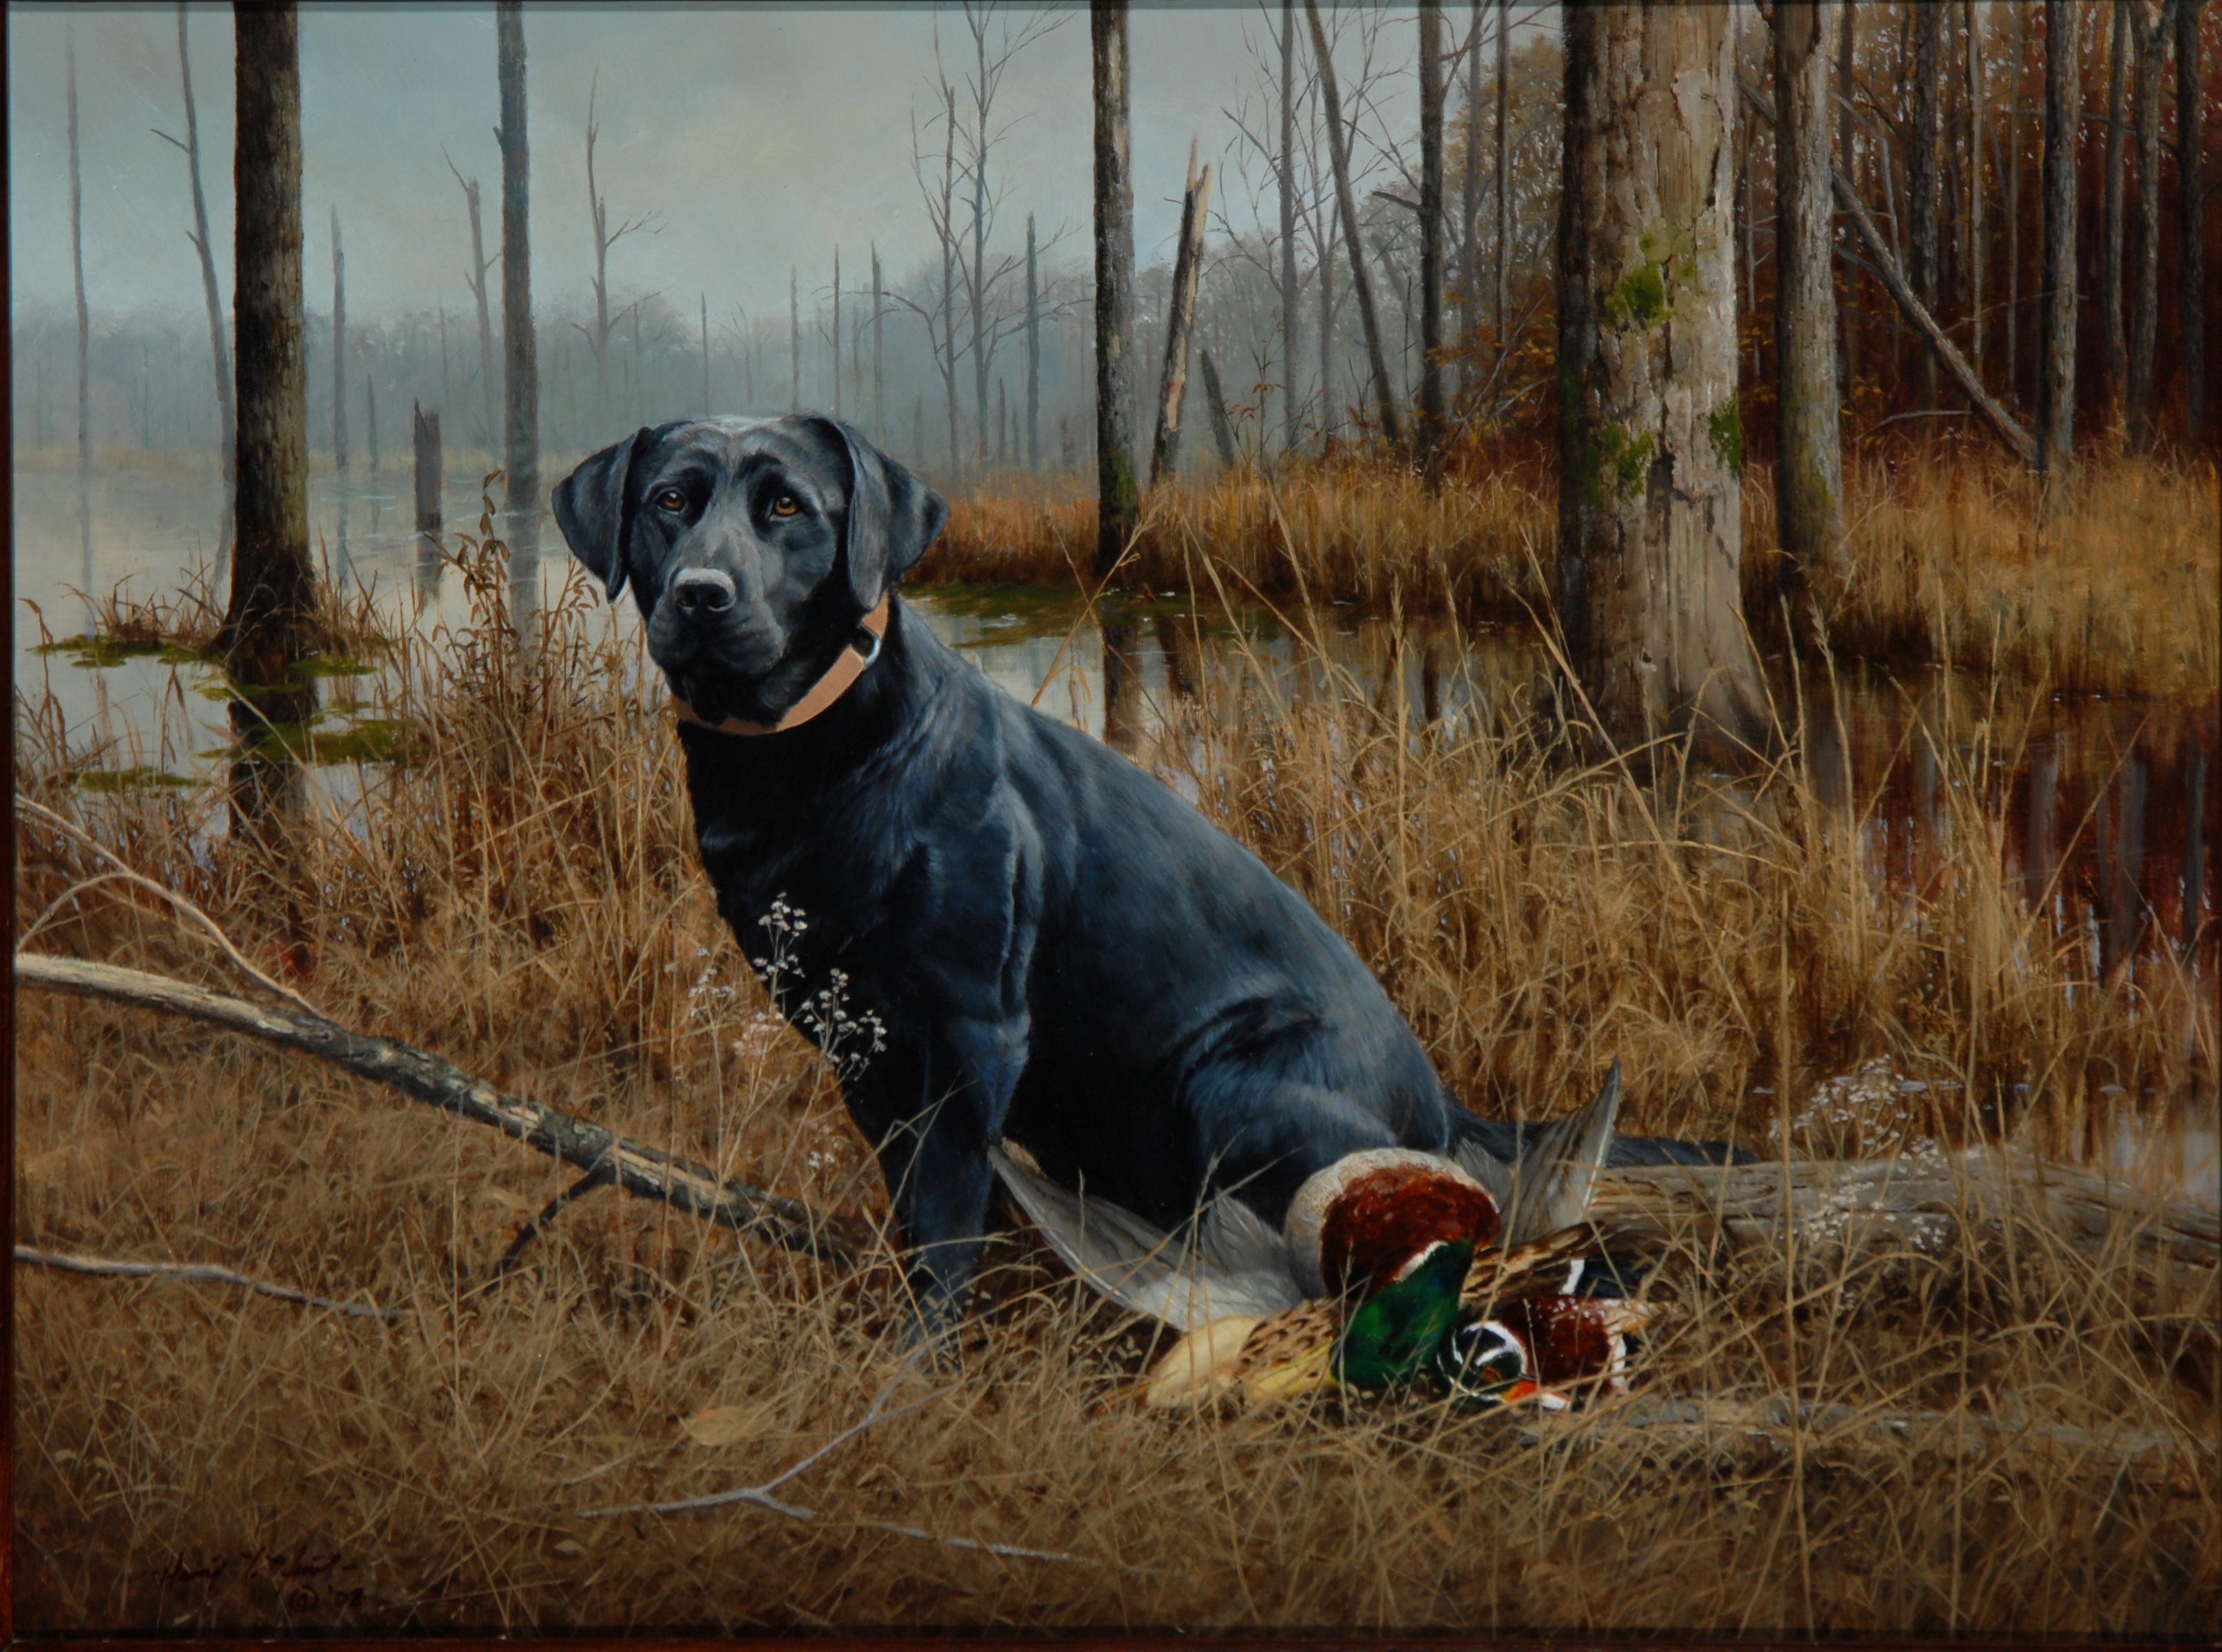 Ducks Unlimited Prints In Posters Shop At Bizrate